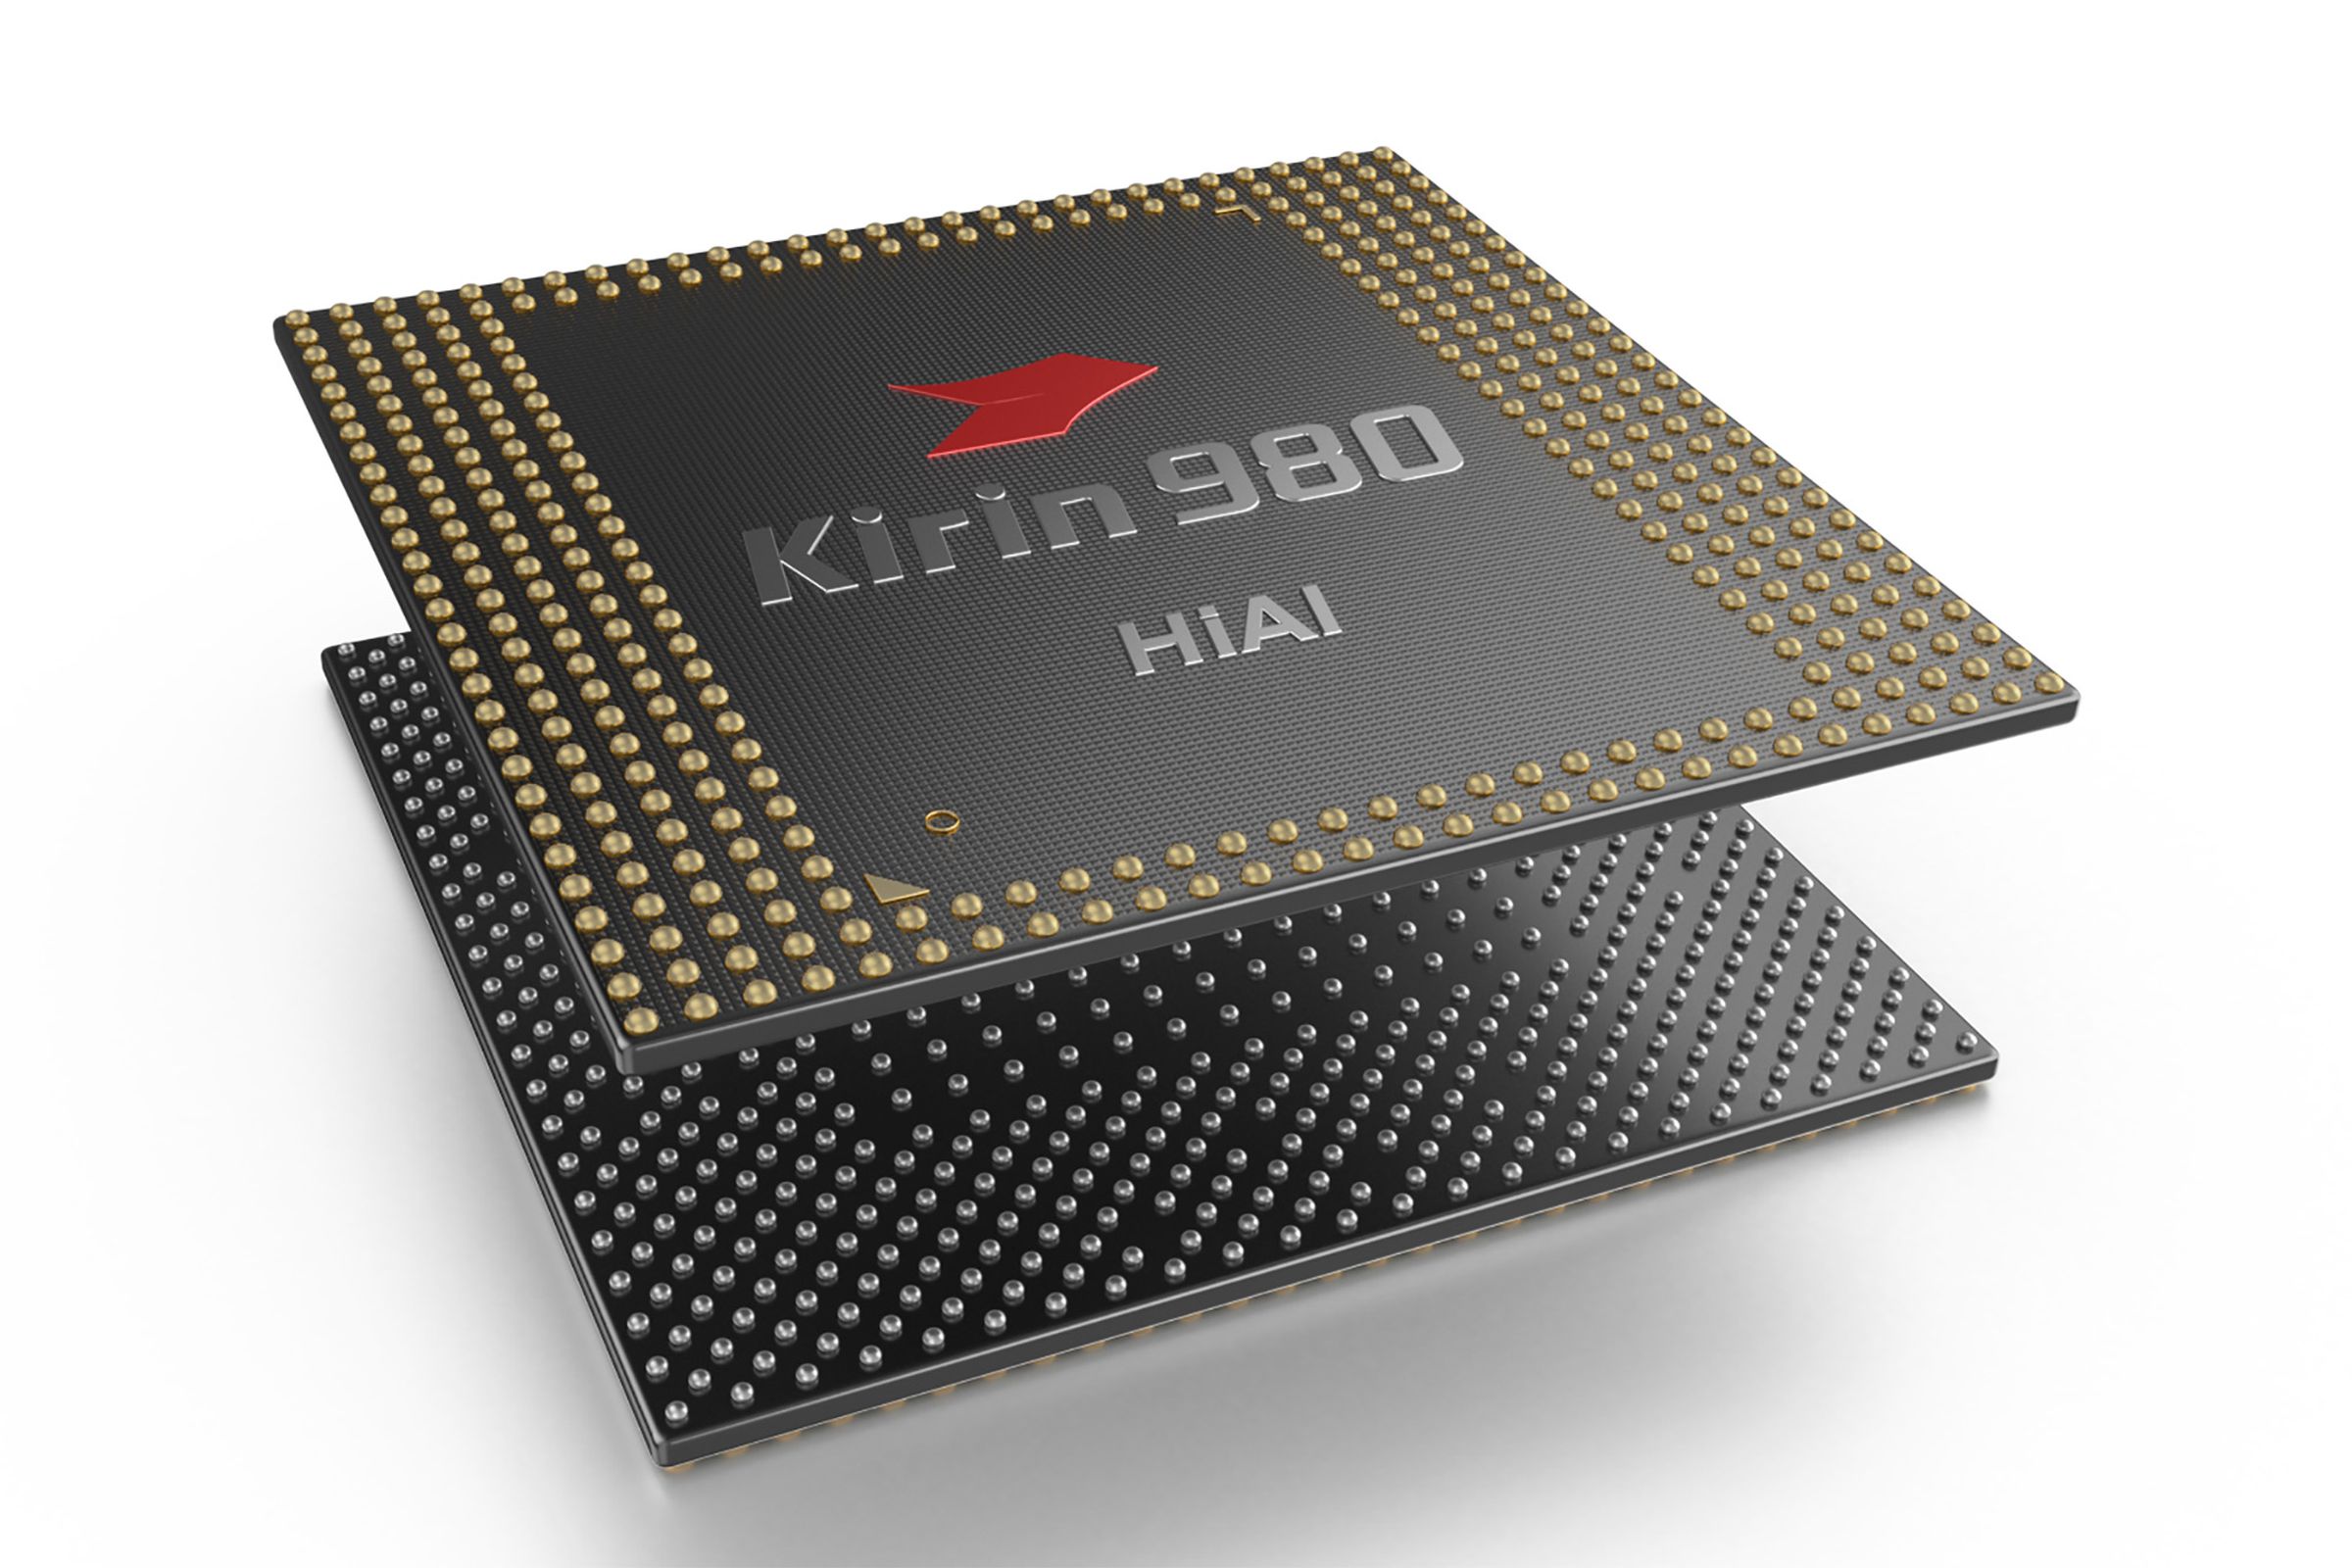 The Kirin 980 system-on-a-chip